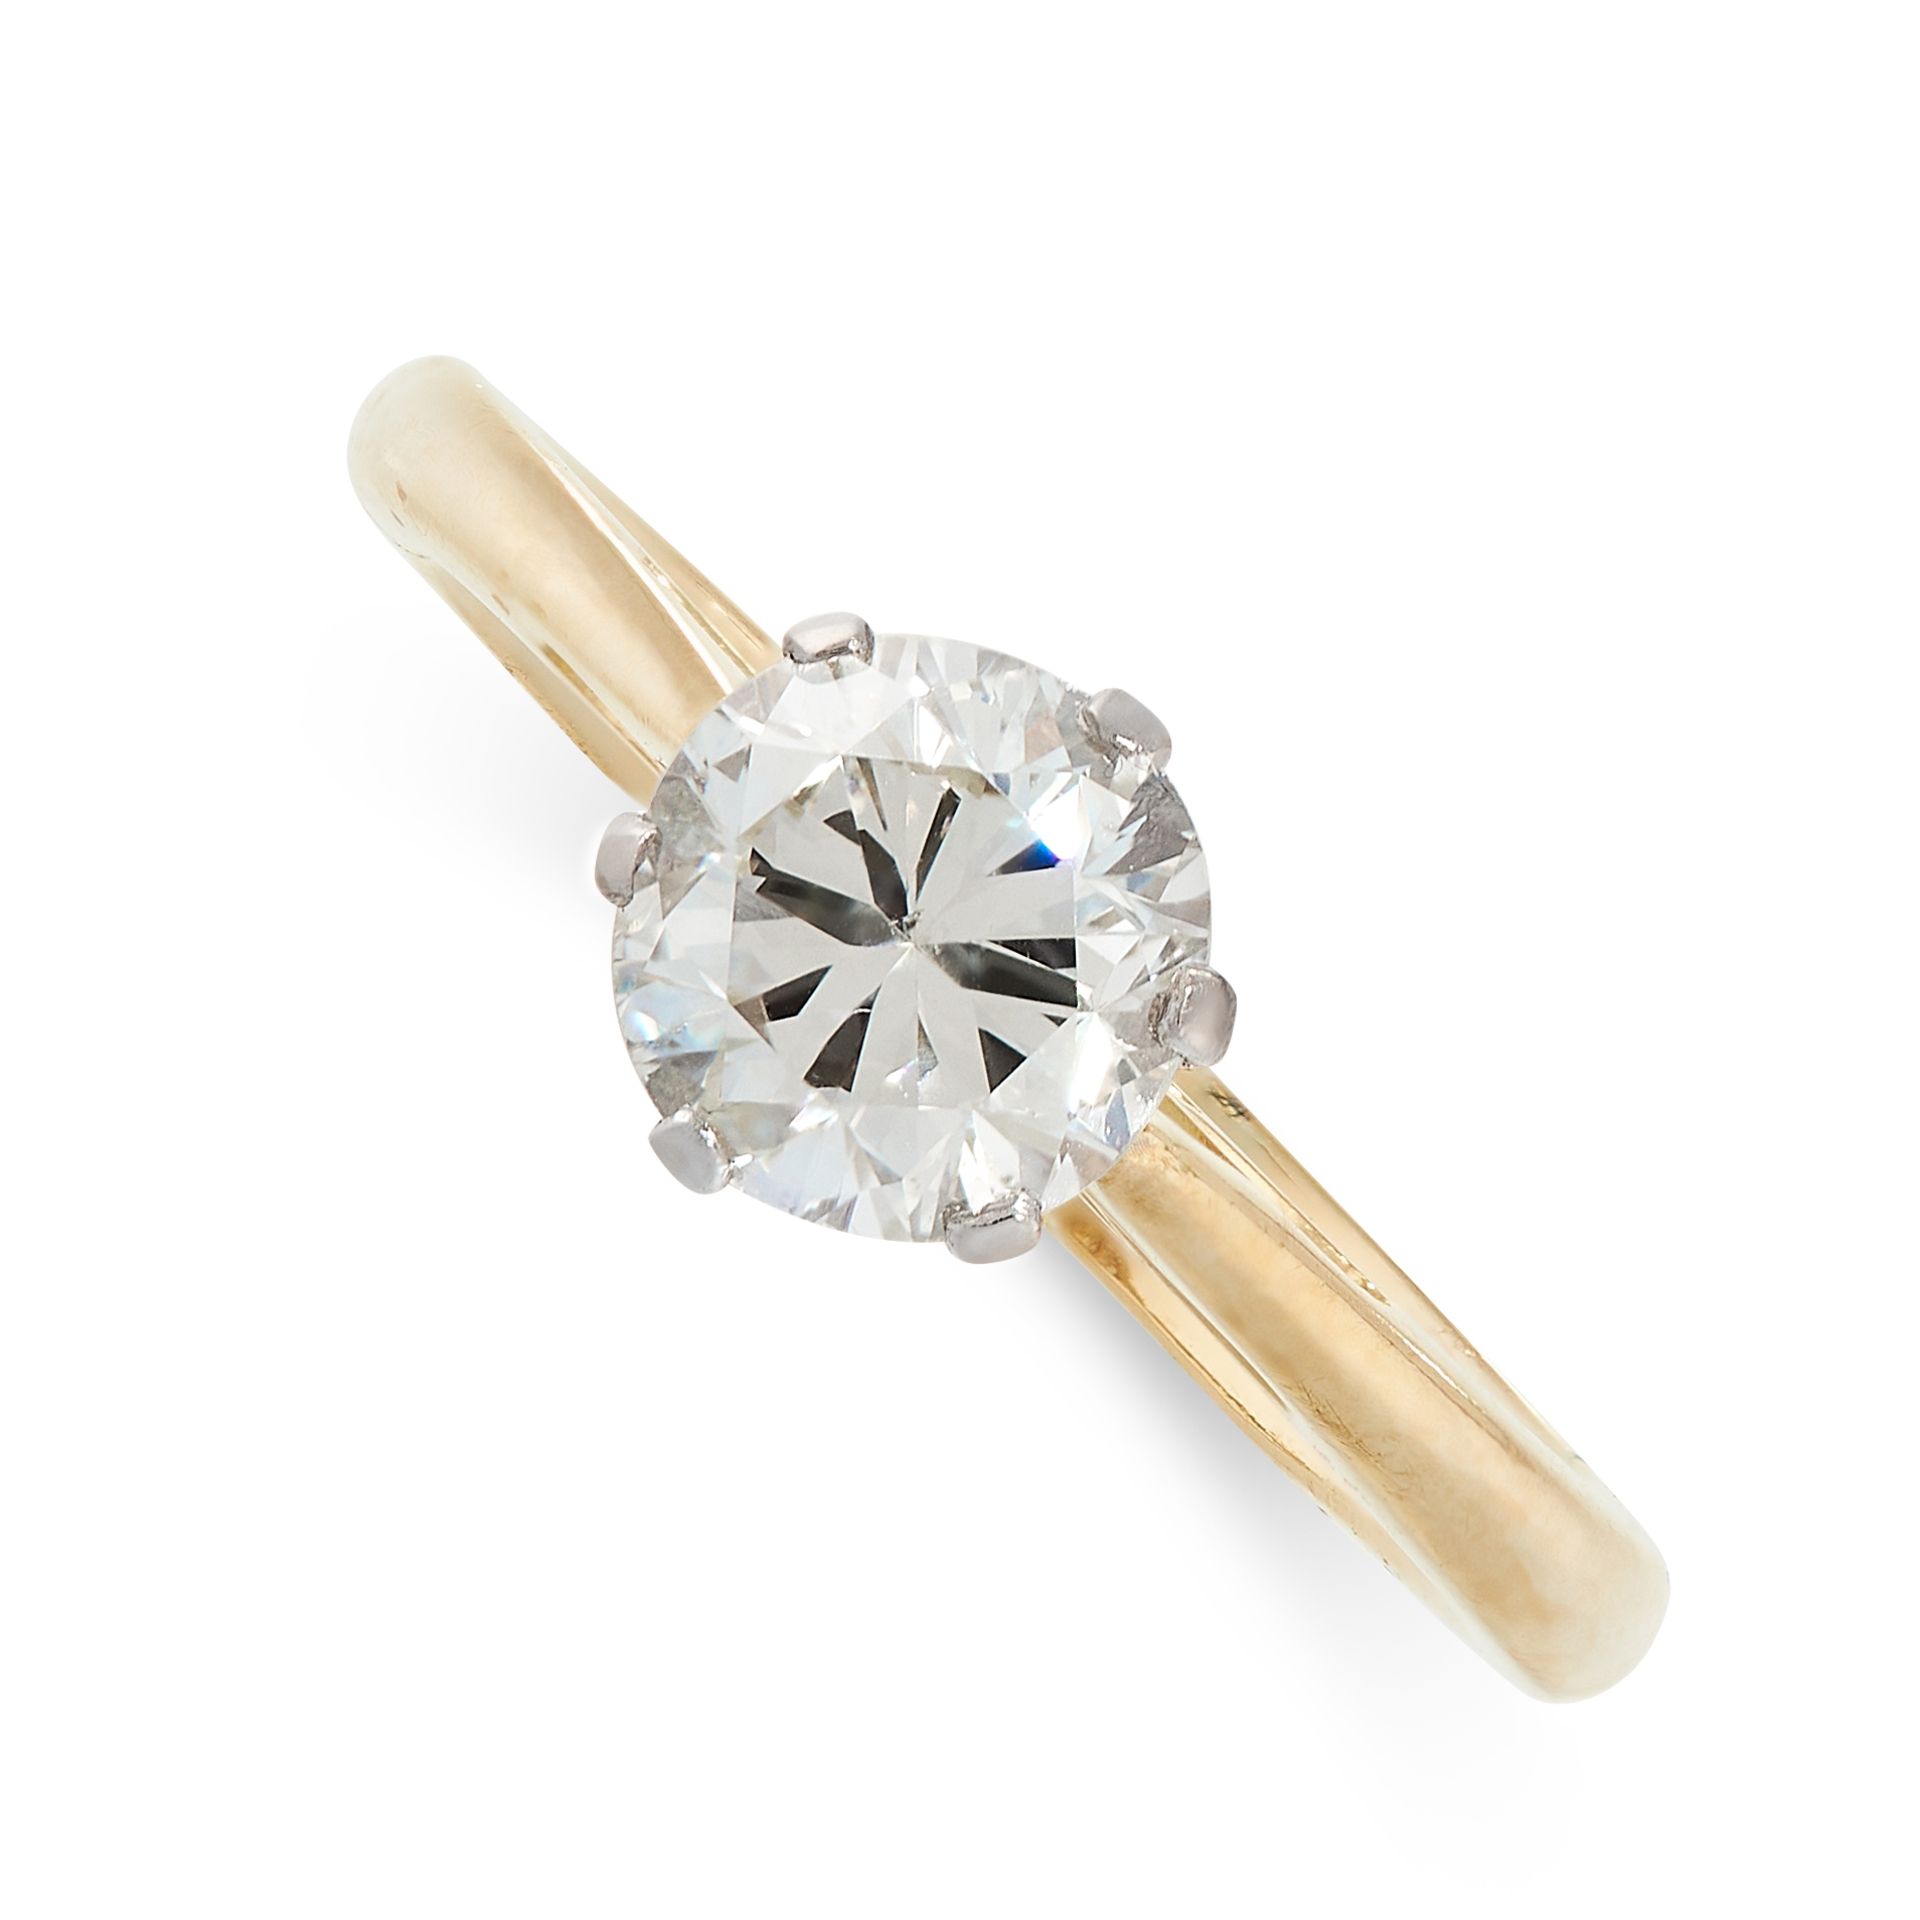 DIAMOND SOLITAIRE ENGAGEMENT RING in 18ct yellow gold, set with a round cut diamond of 1.17